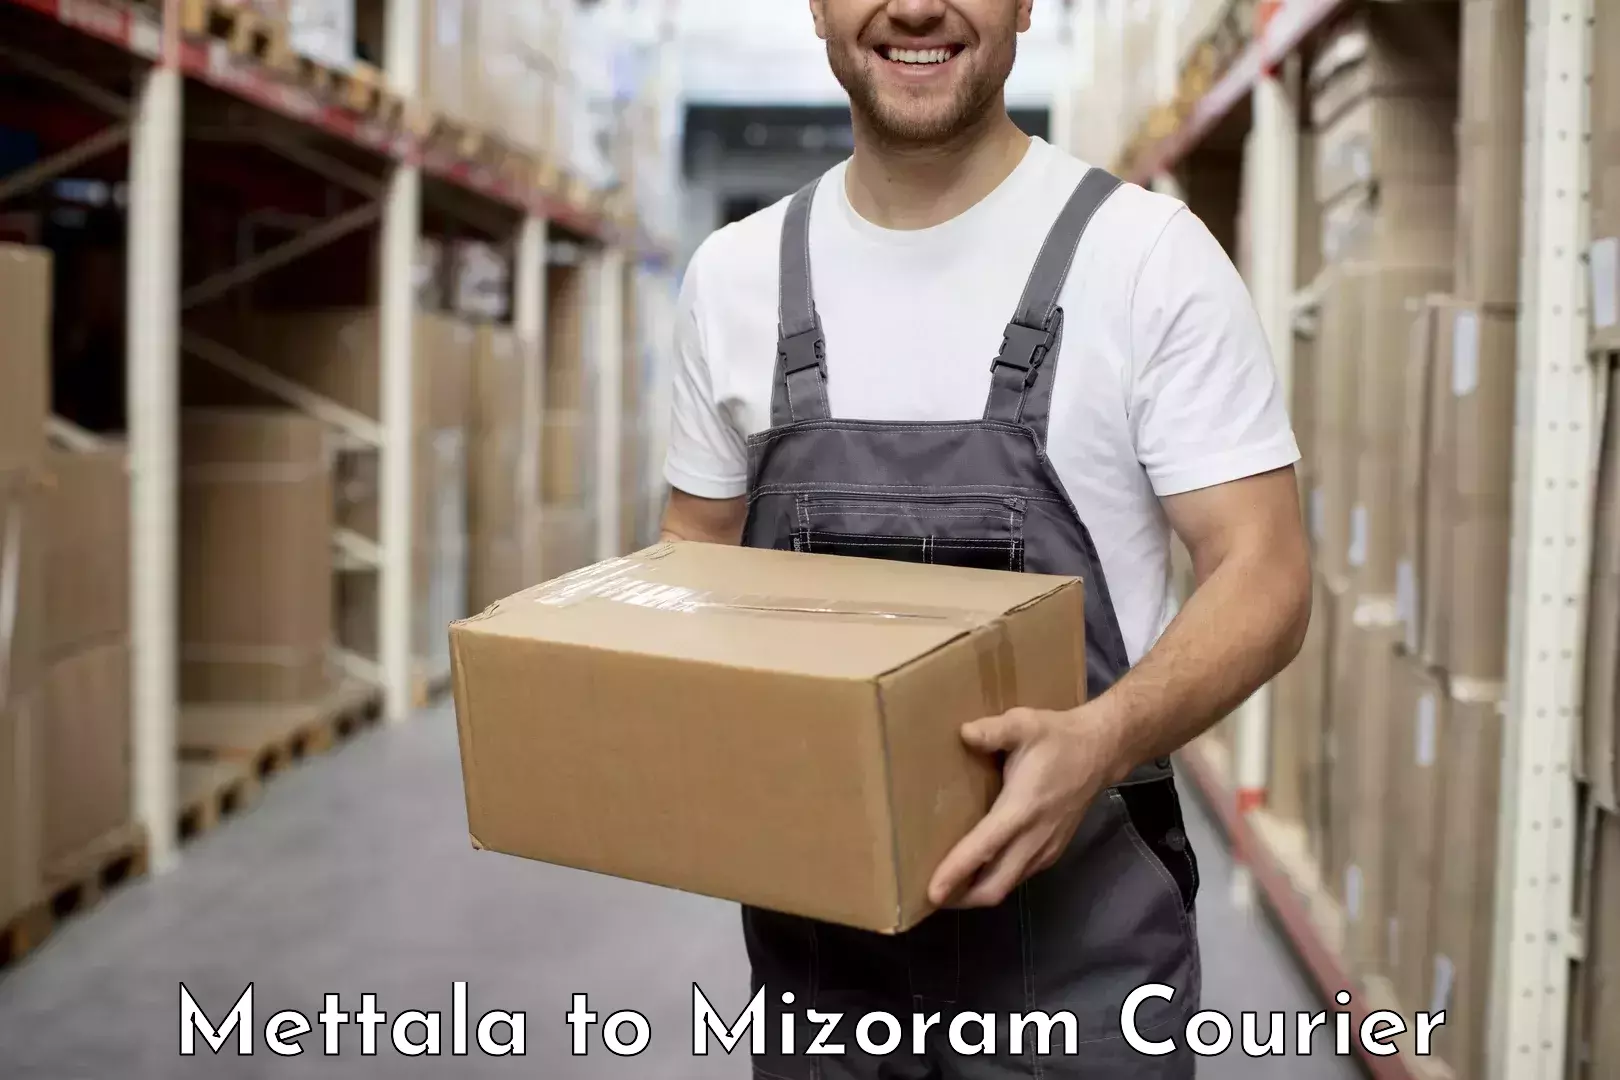 Customer-centric shipping Mettala to Tlabung